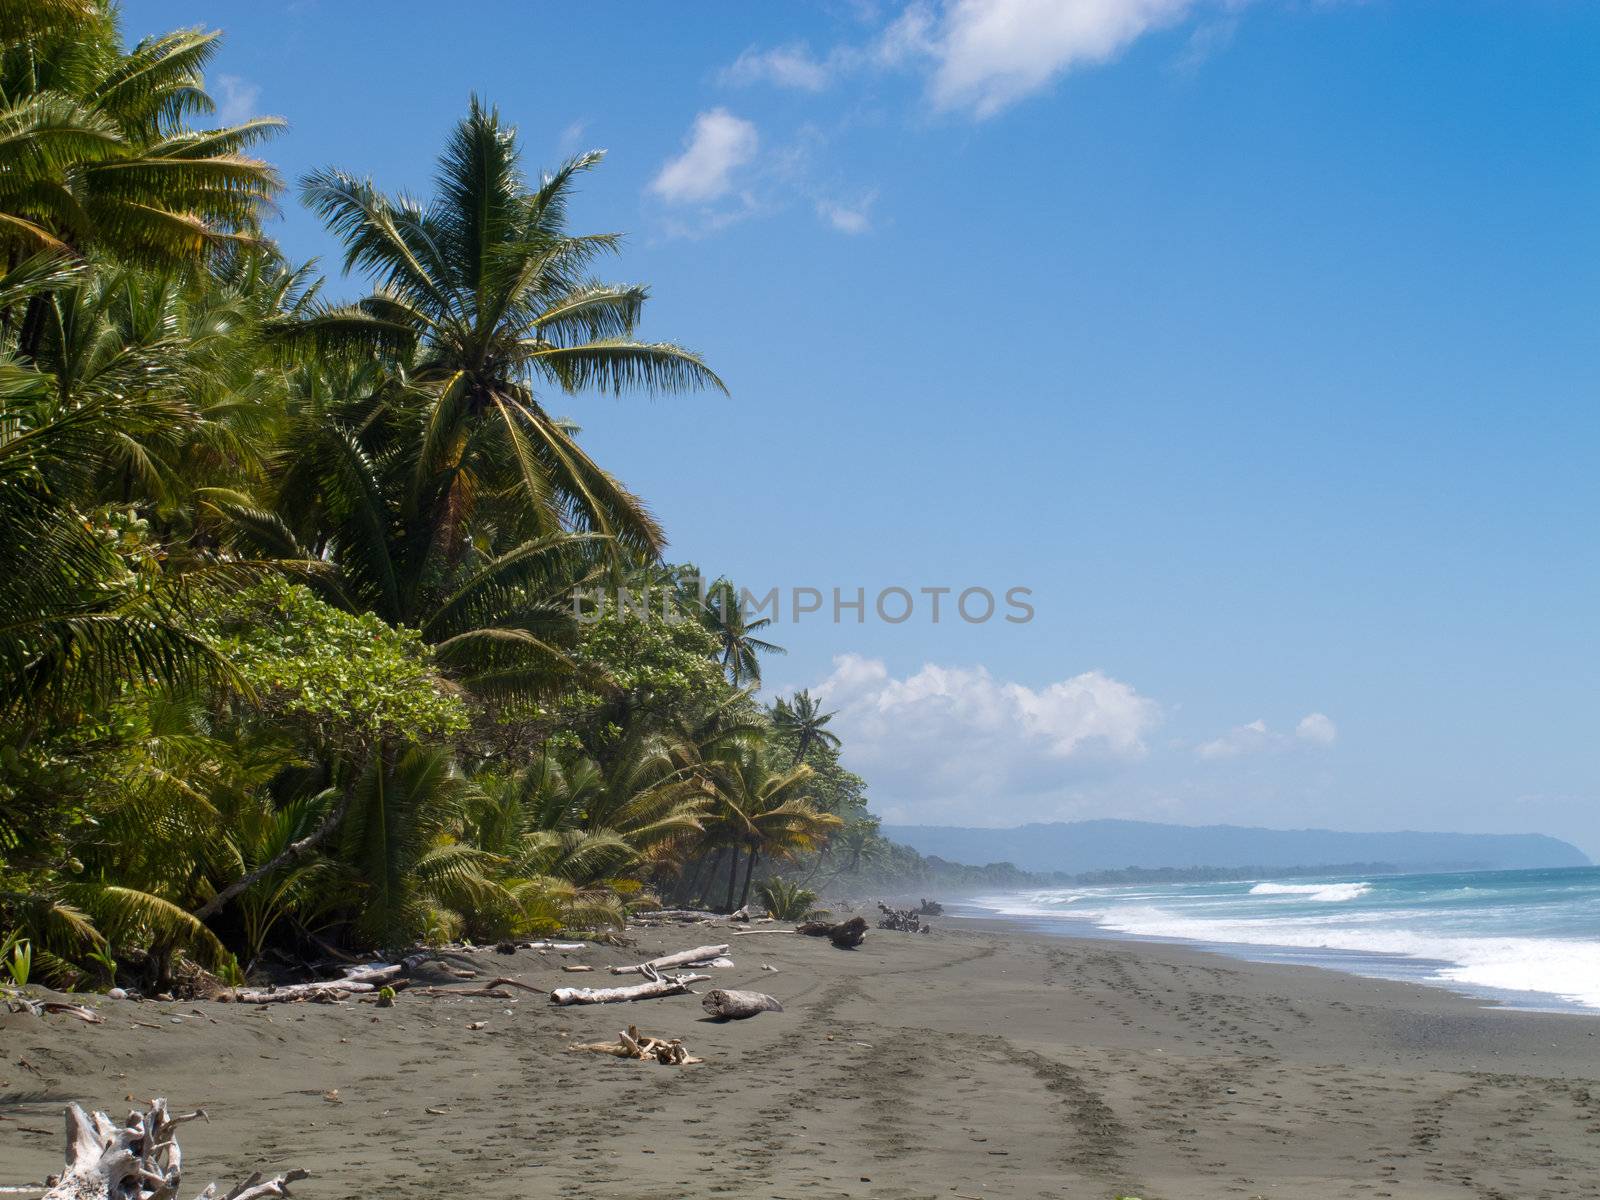 Deserted tropical beach in Costa Rica Corcovada national park